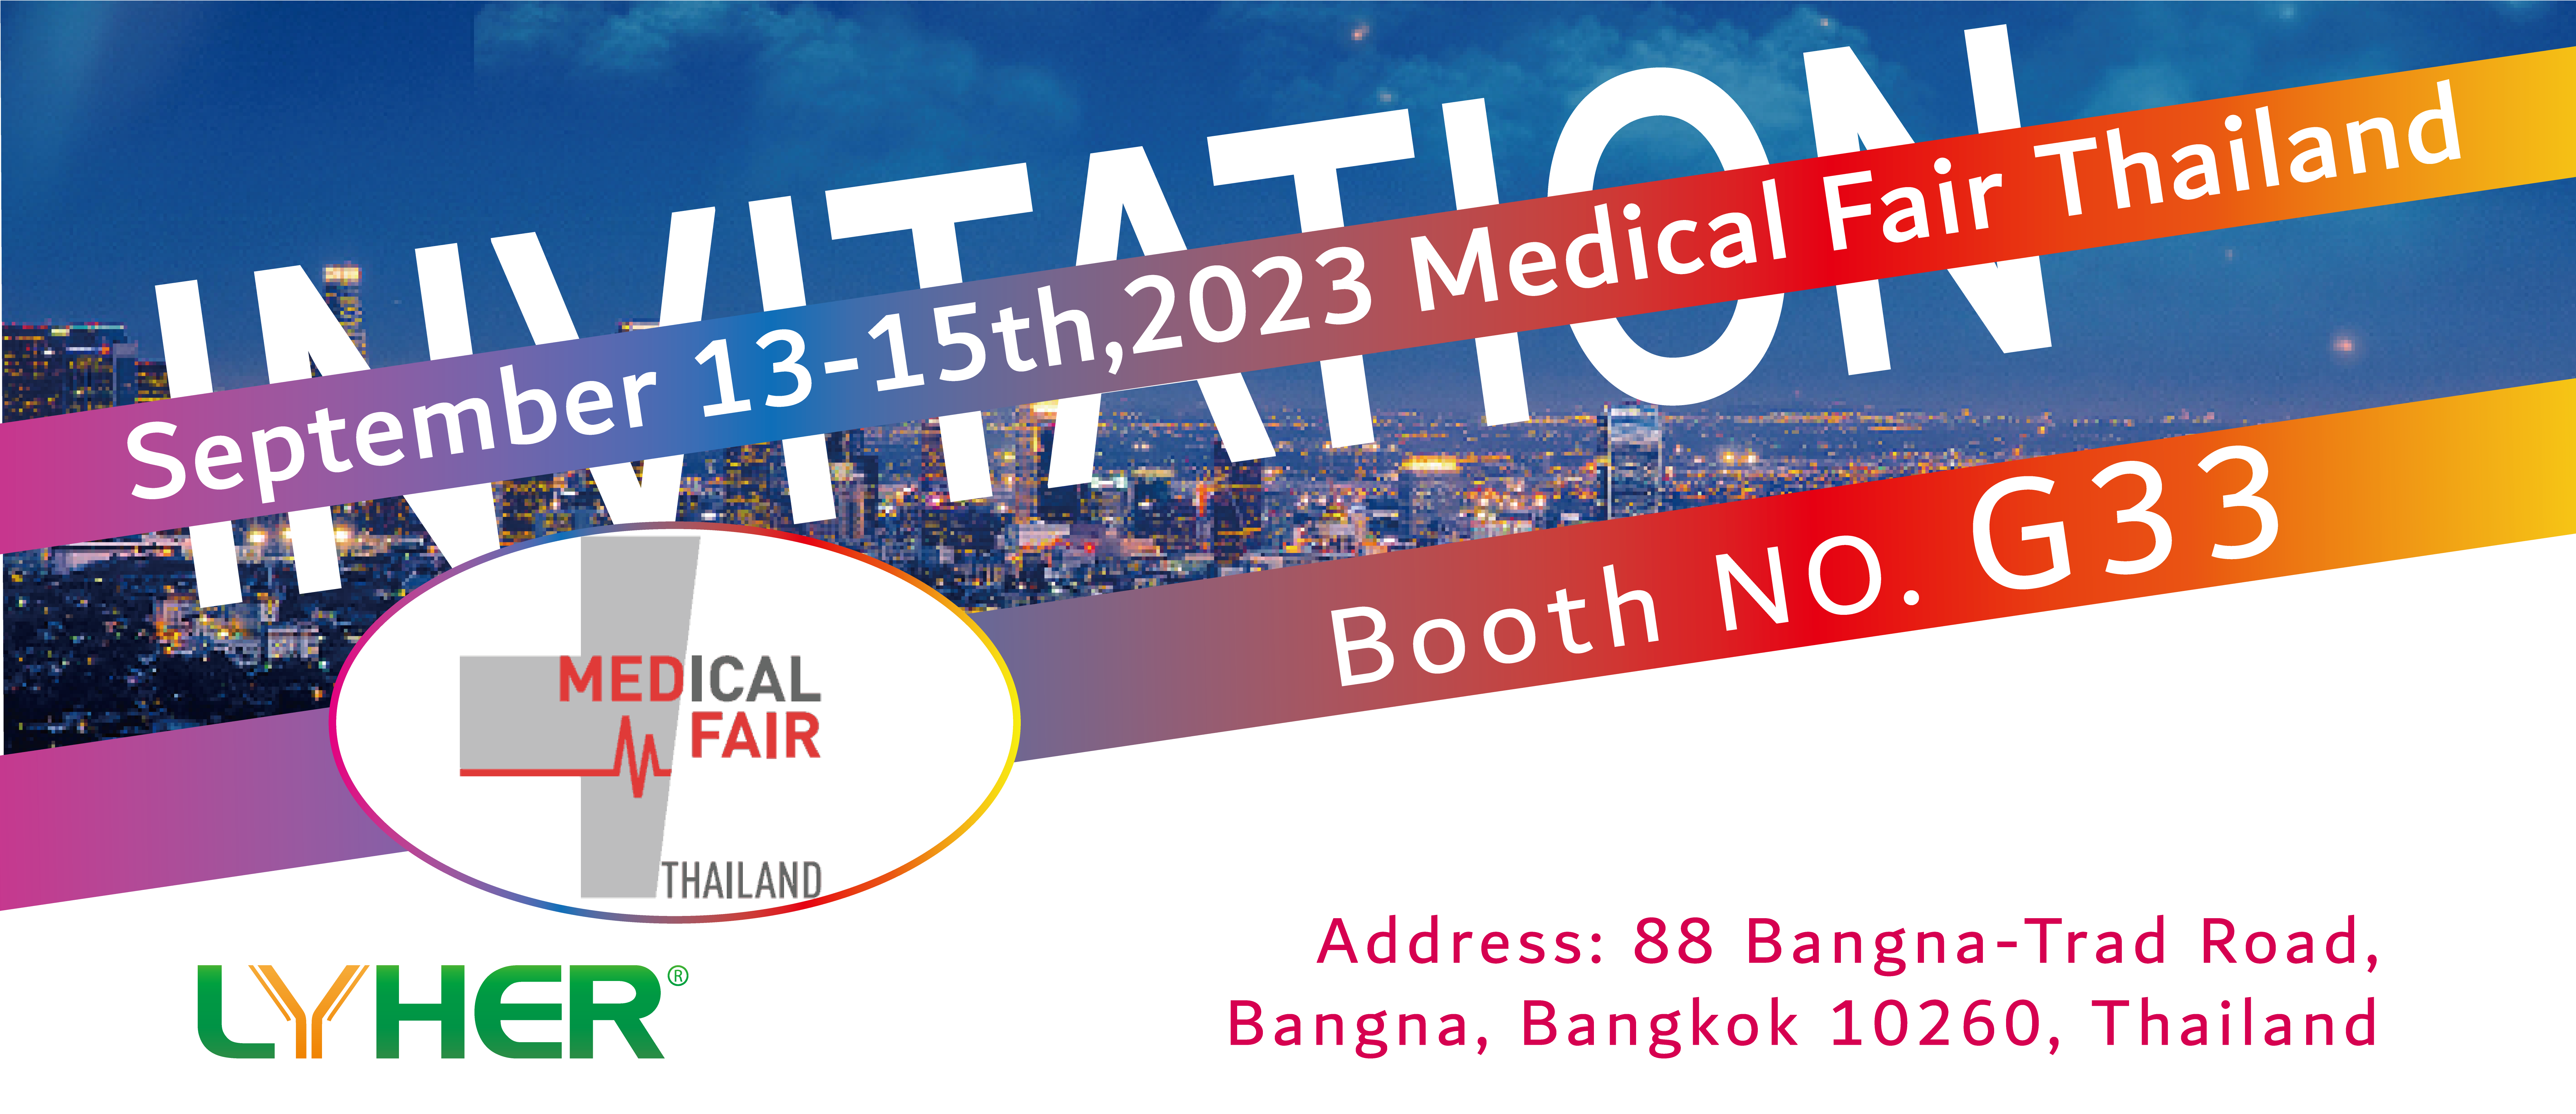 Welcome to know more about LYHER at Medical Fair Thailand 2023！